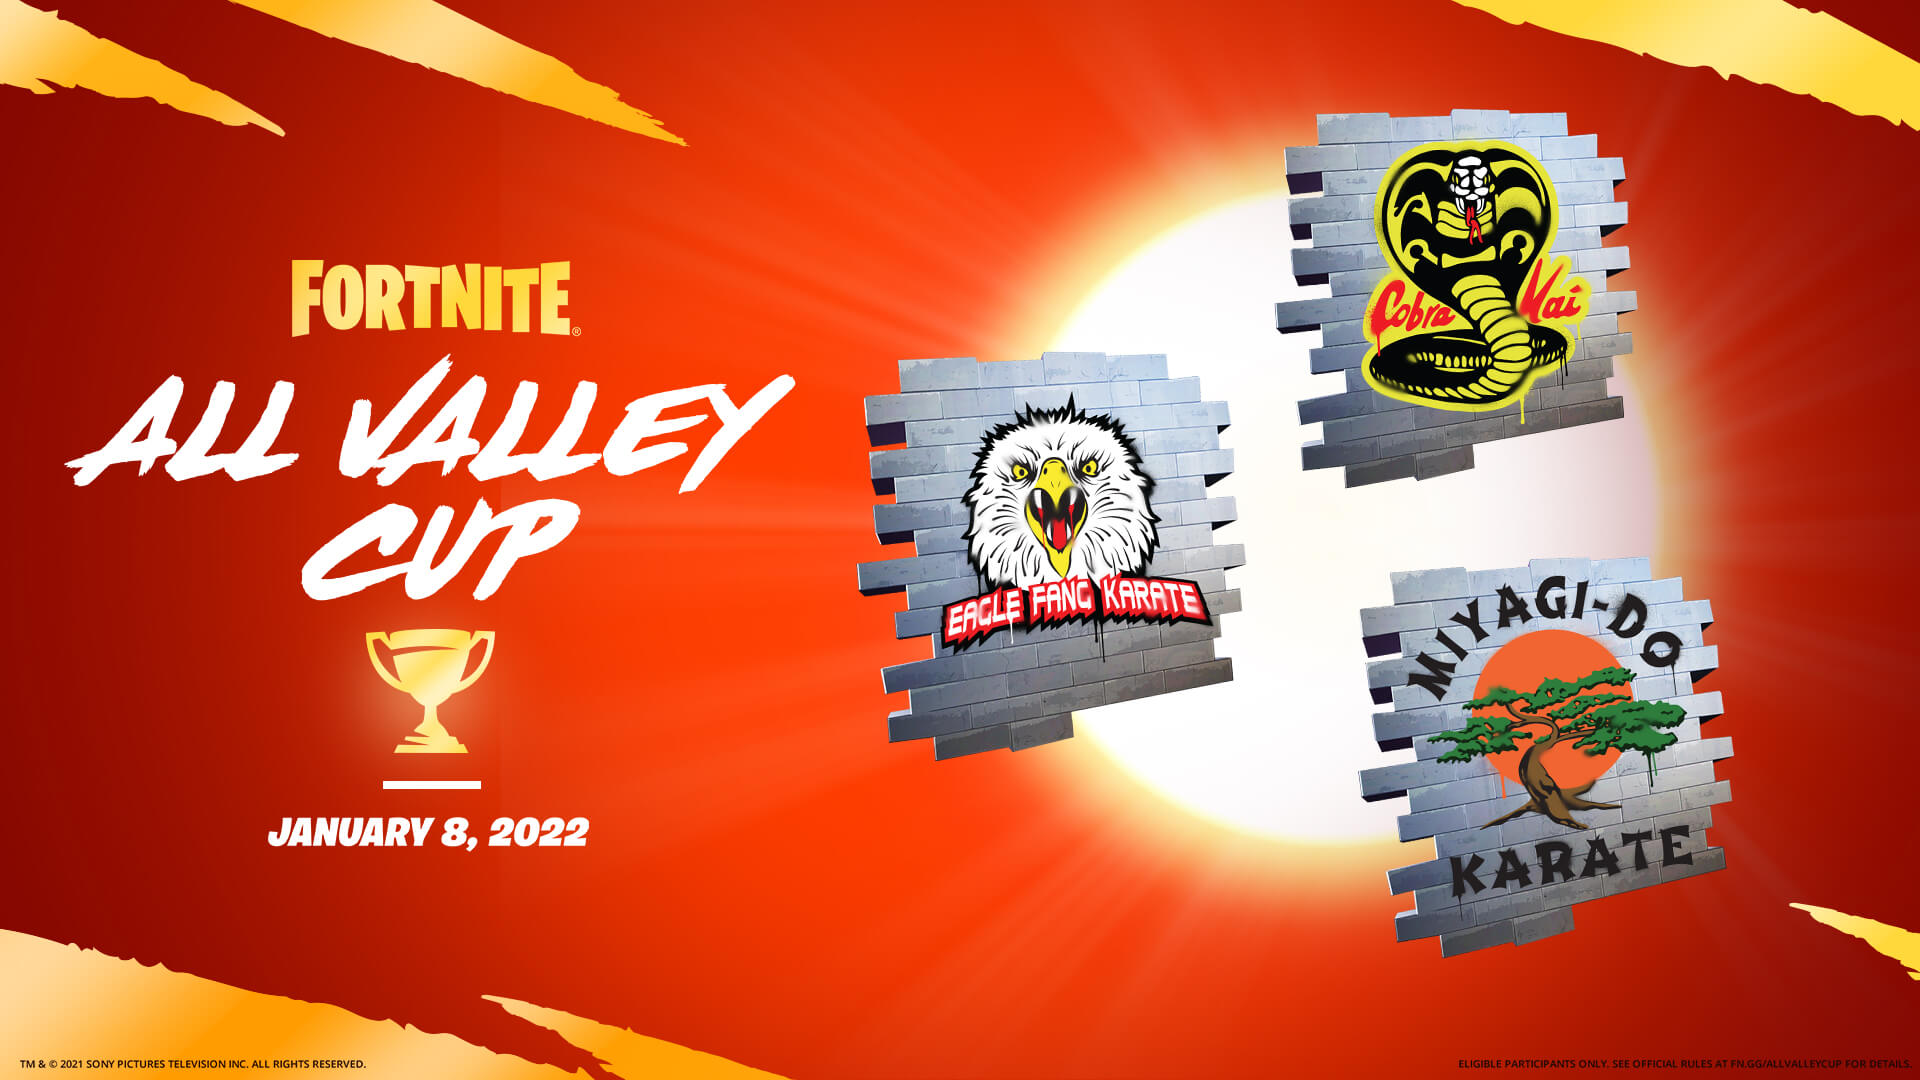 Fortnite x Cobra Kai: Get three Sprays in Fortnite All Valley Cup, Check Details